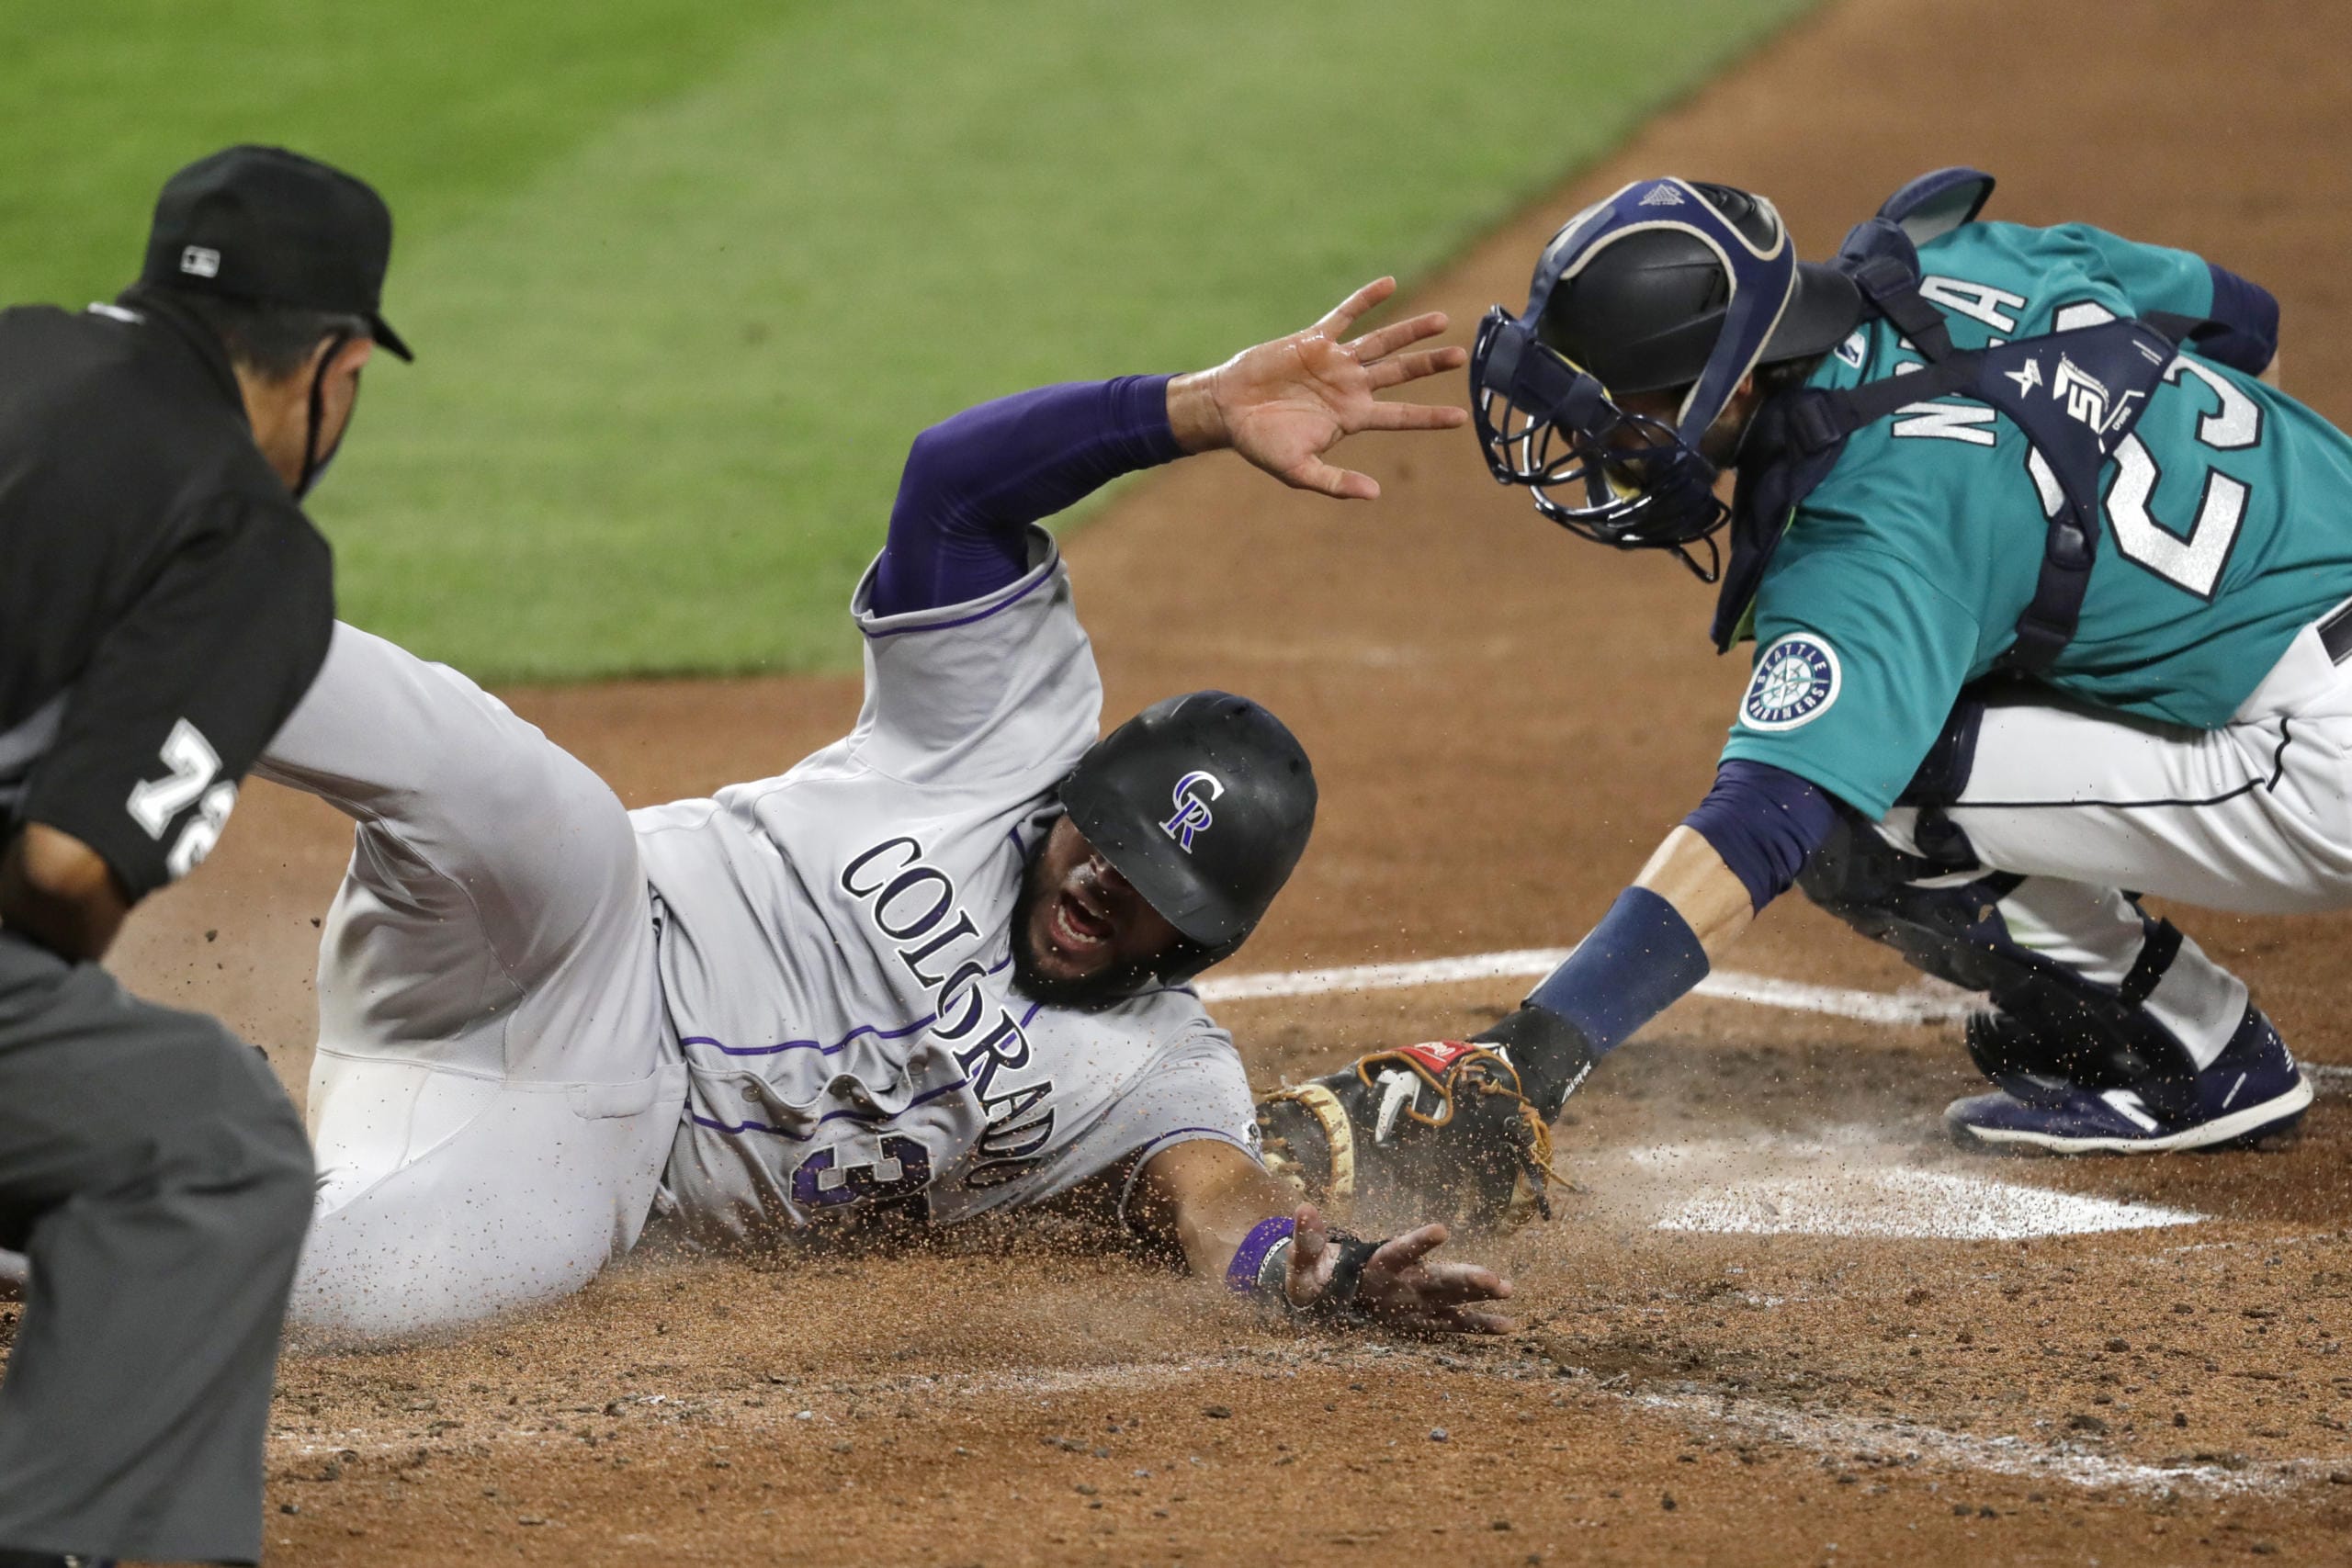 Colorado Rockies' Elias Diaz slides safely across home as Seattle Mariners catcher Austin Nola puts on a late tag in the third inning of a baseball game Friday, Aug. 7, 2020, in Seattle.